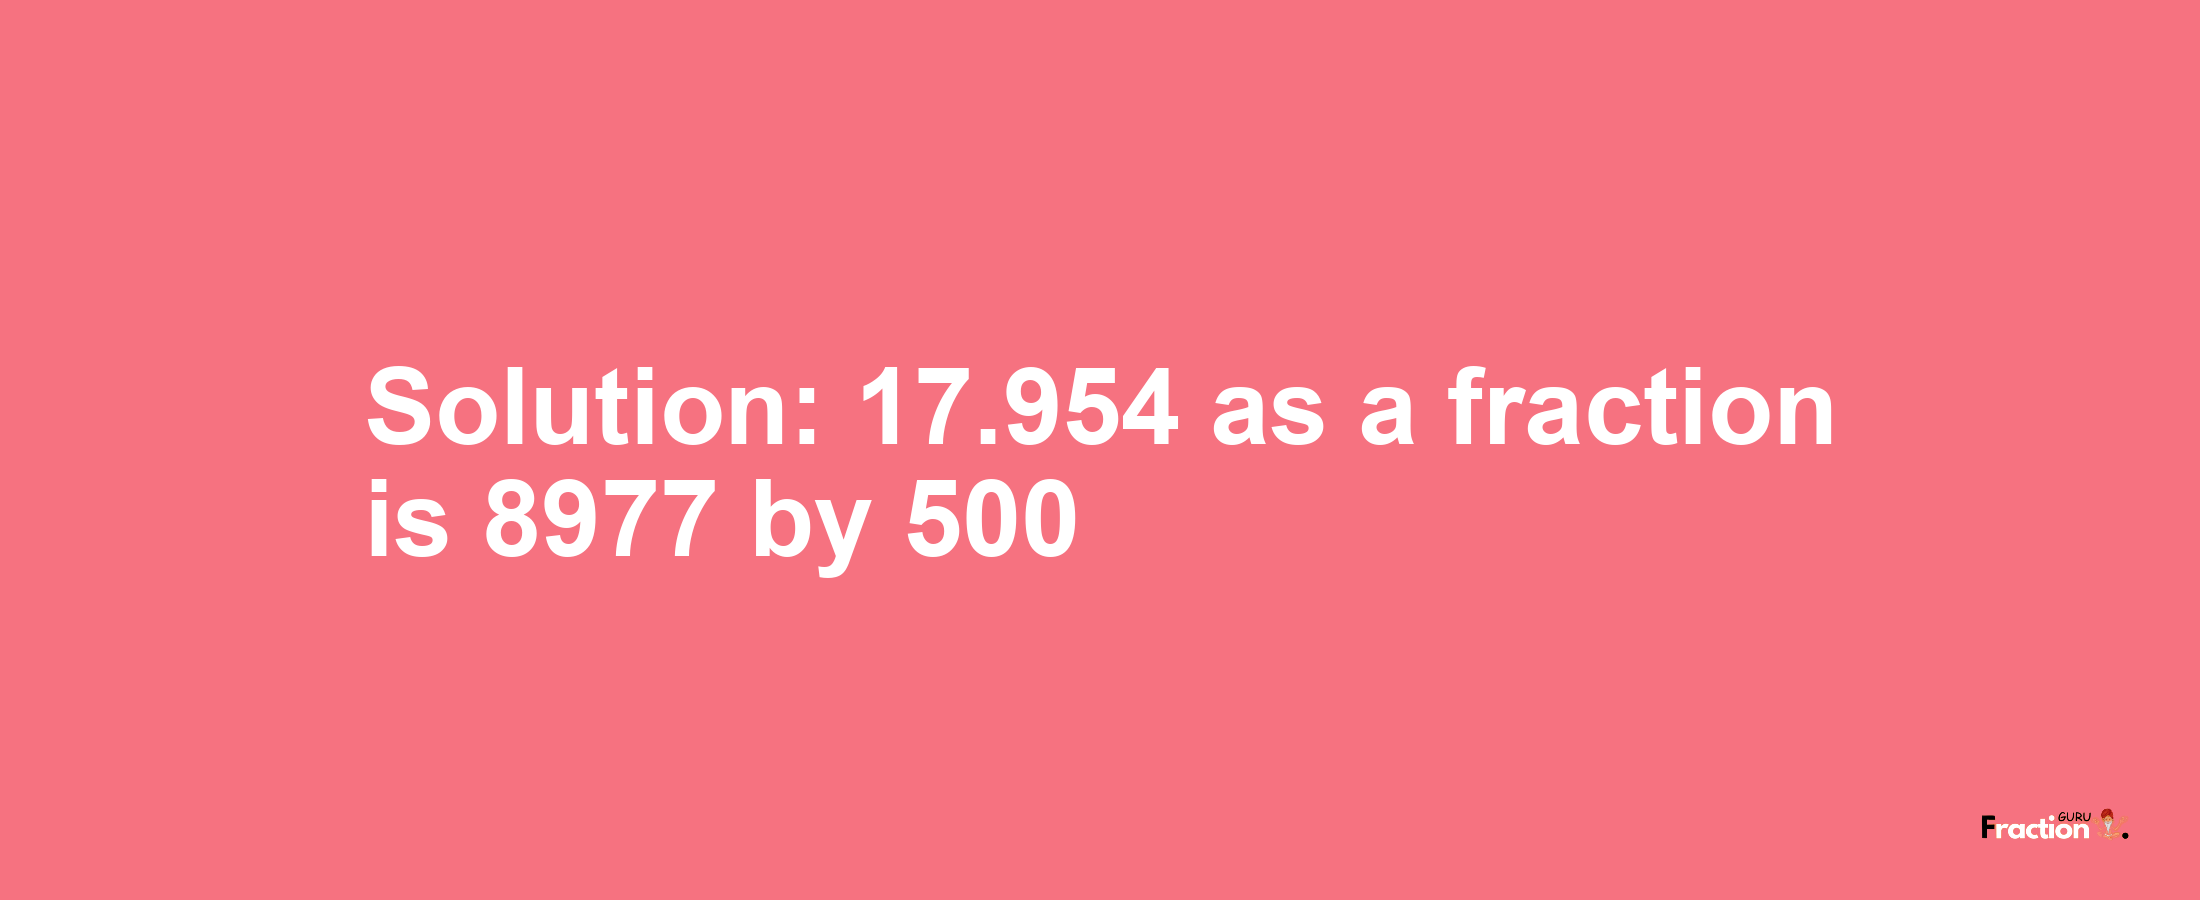 Solution:17.954 as a fraction is 8977/500